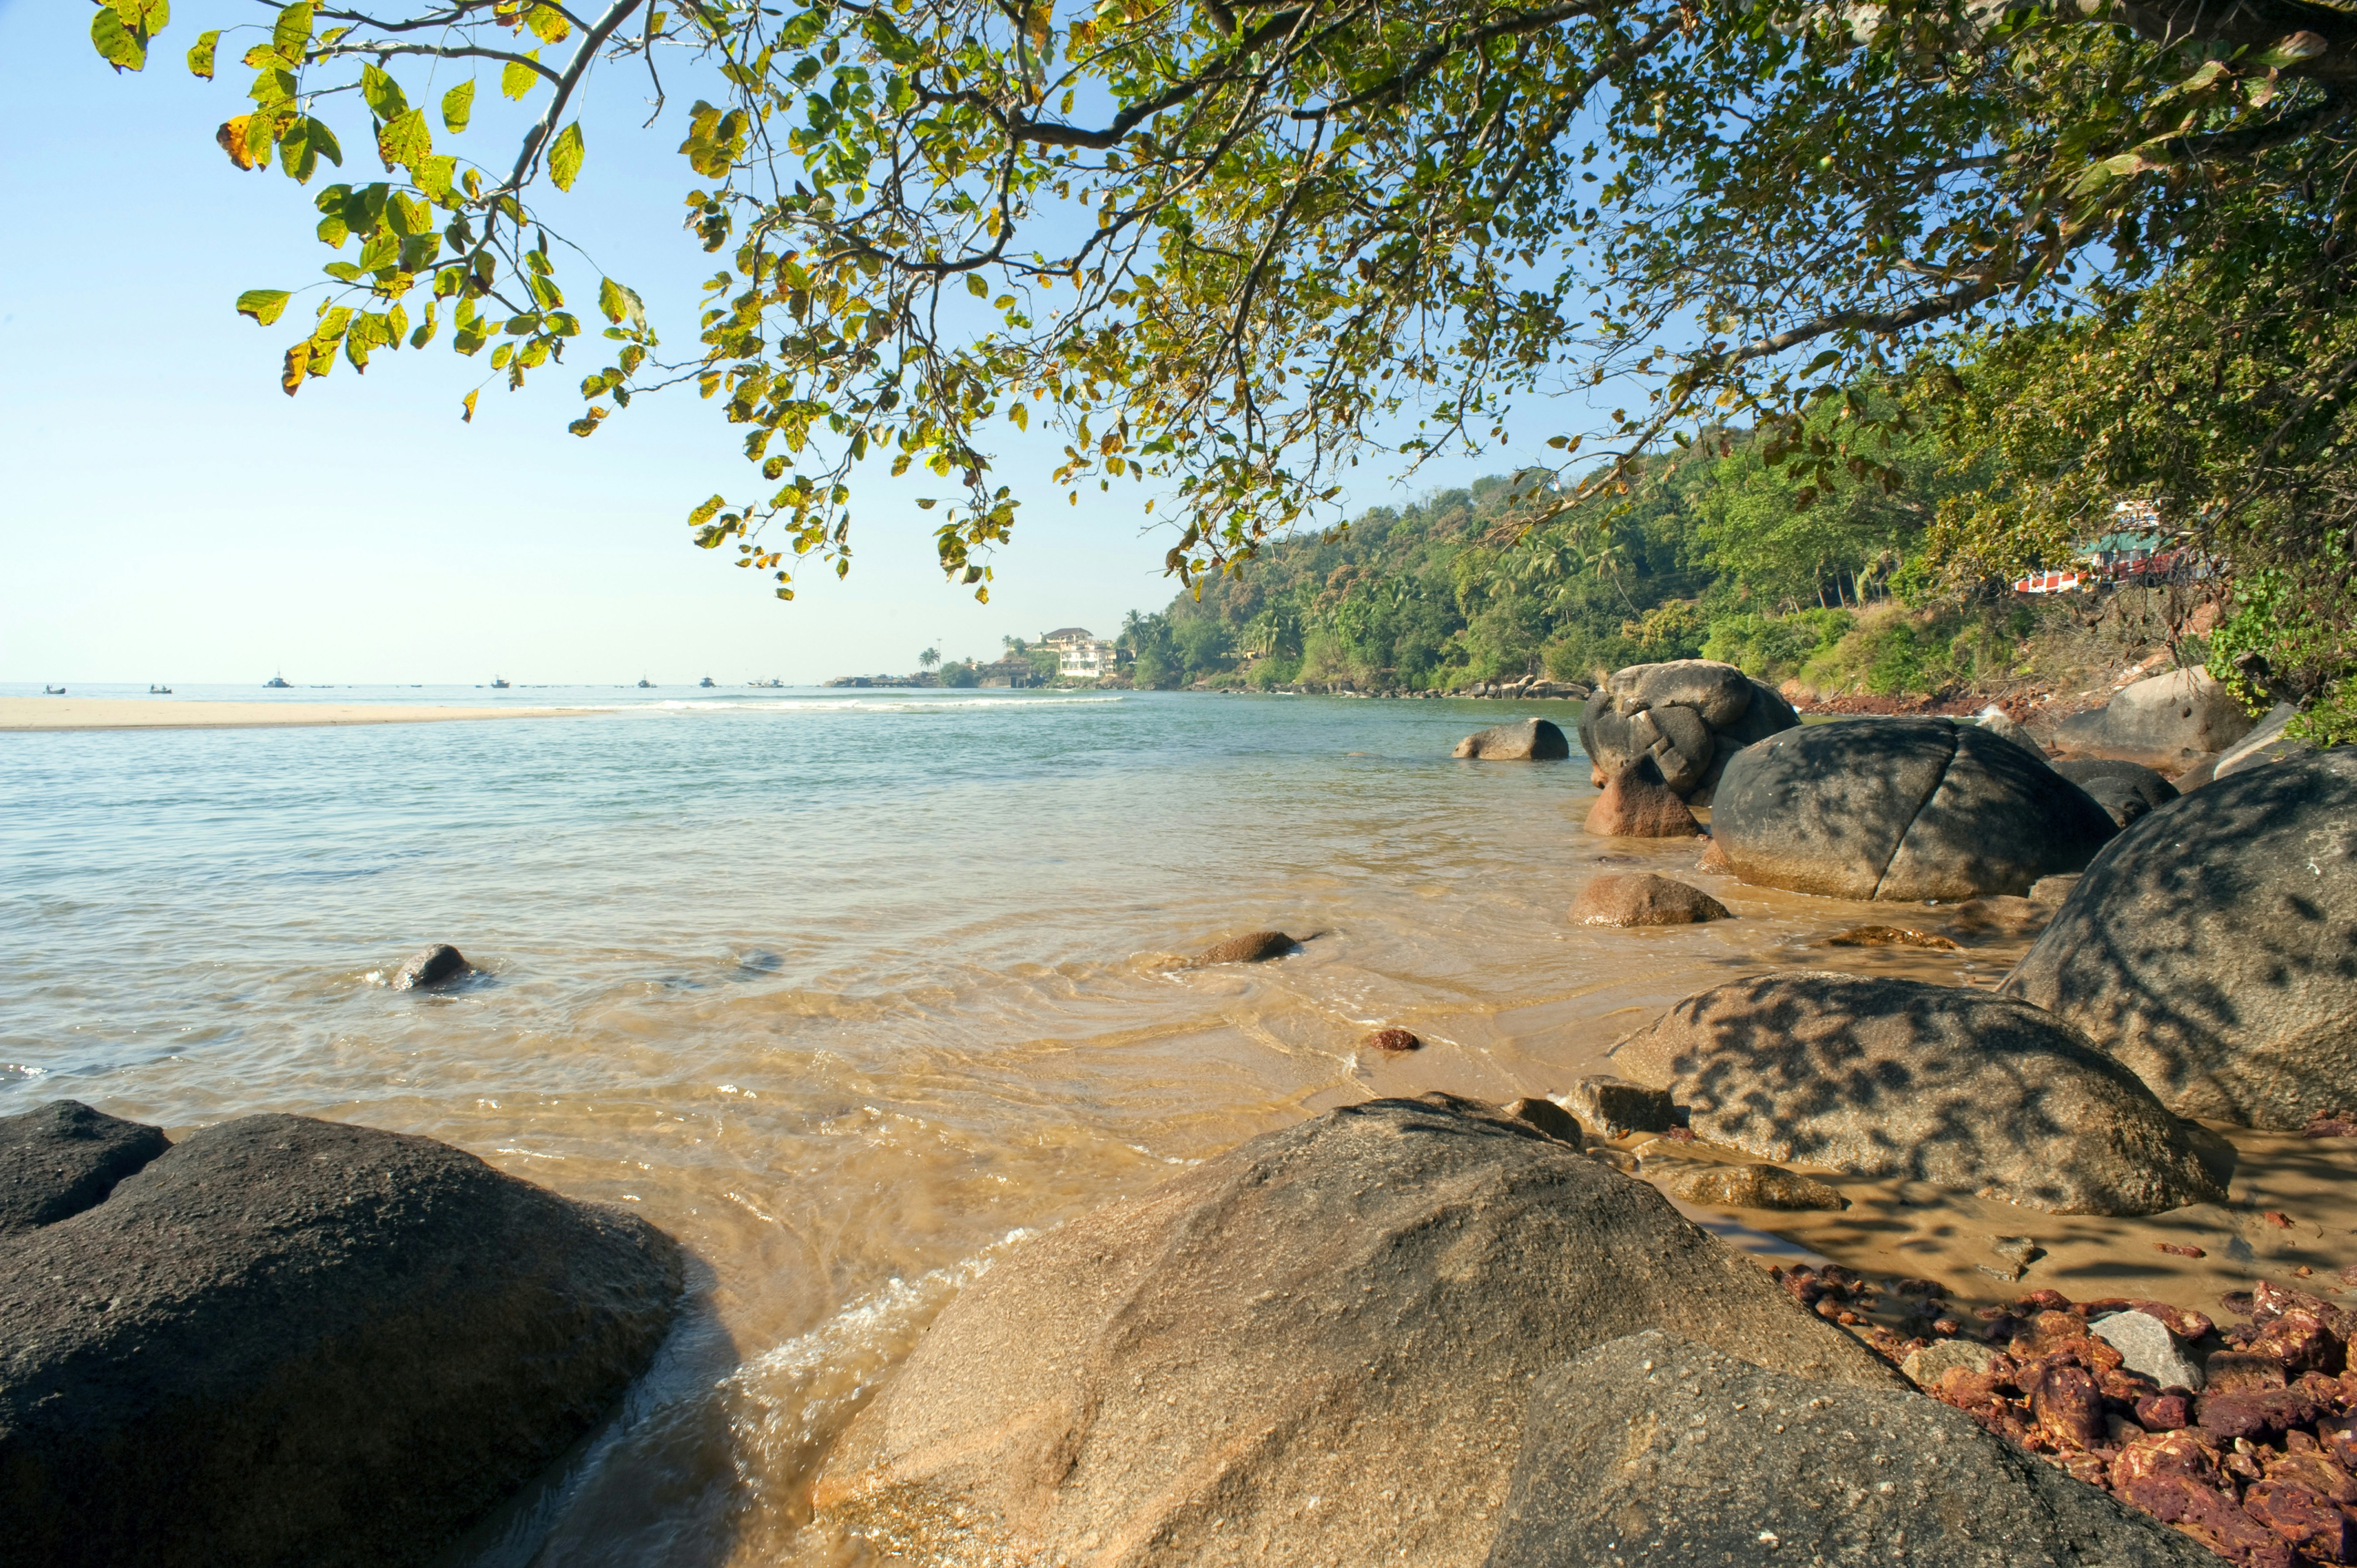 The boulder-strewn coastline of Vengurla, with beautiful blue waters backed by a forested coastline